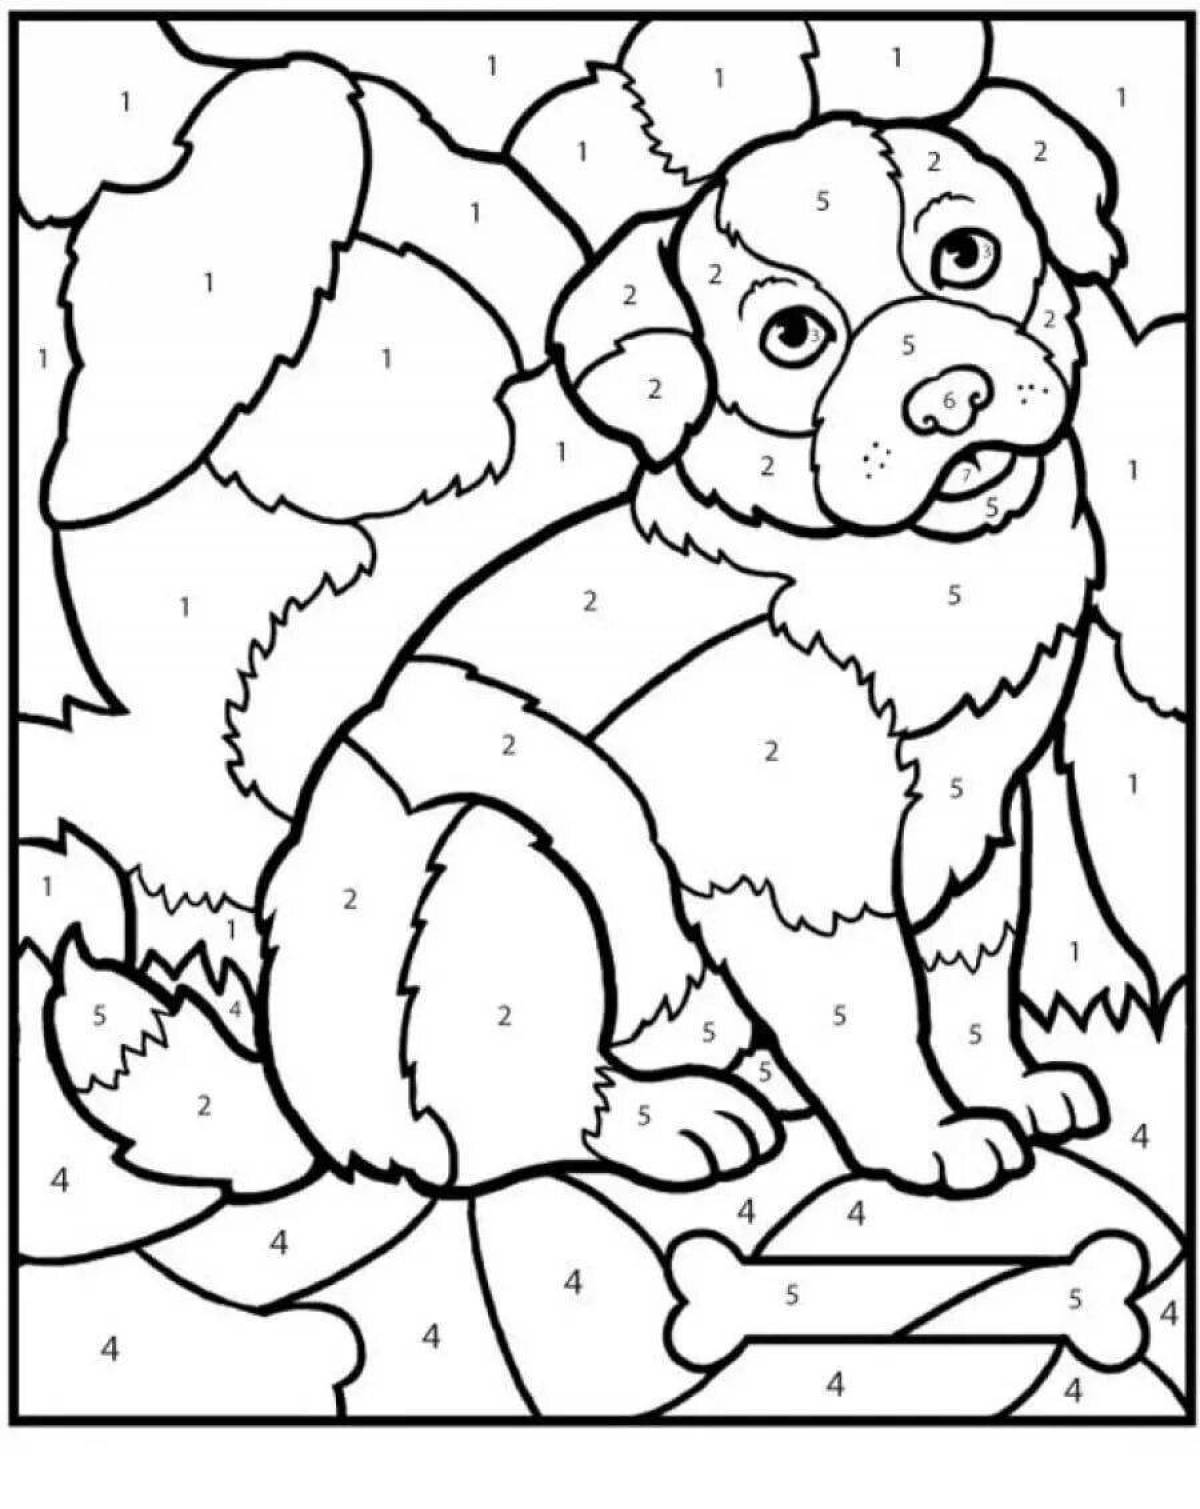 Intriguing coloring book how to find